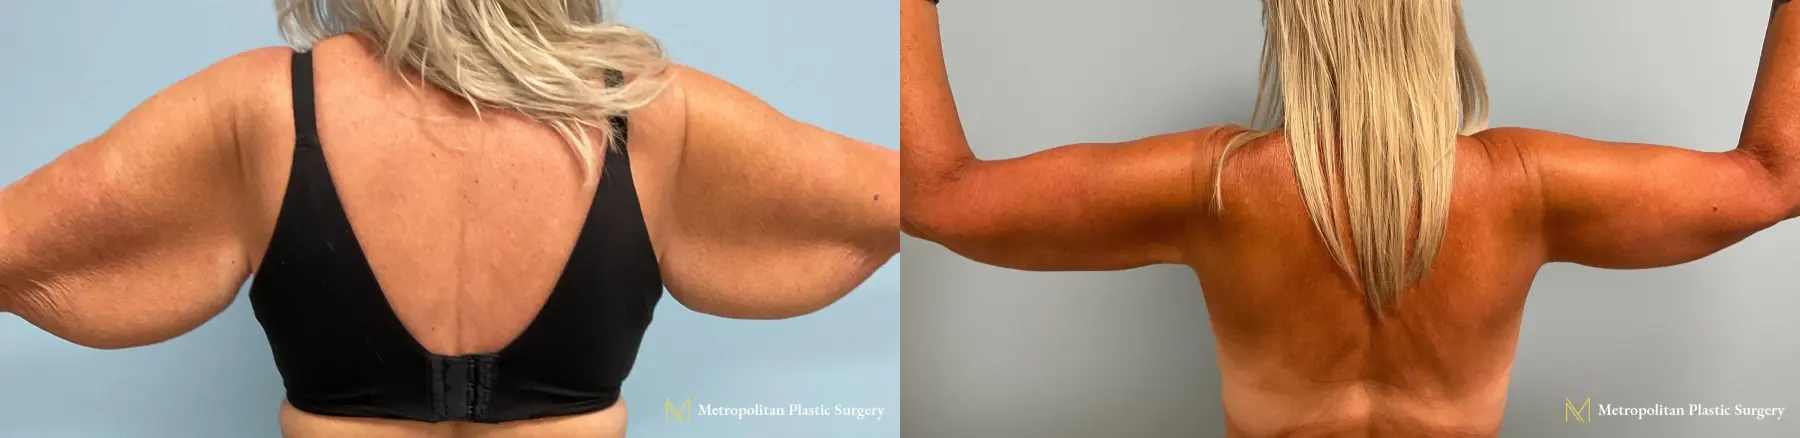 Julia Spears MD Arm Lift Surgery (Brachioplasty) Before and After - Before and After